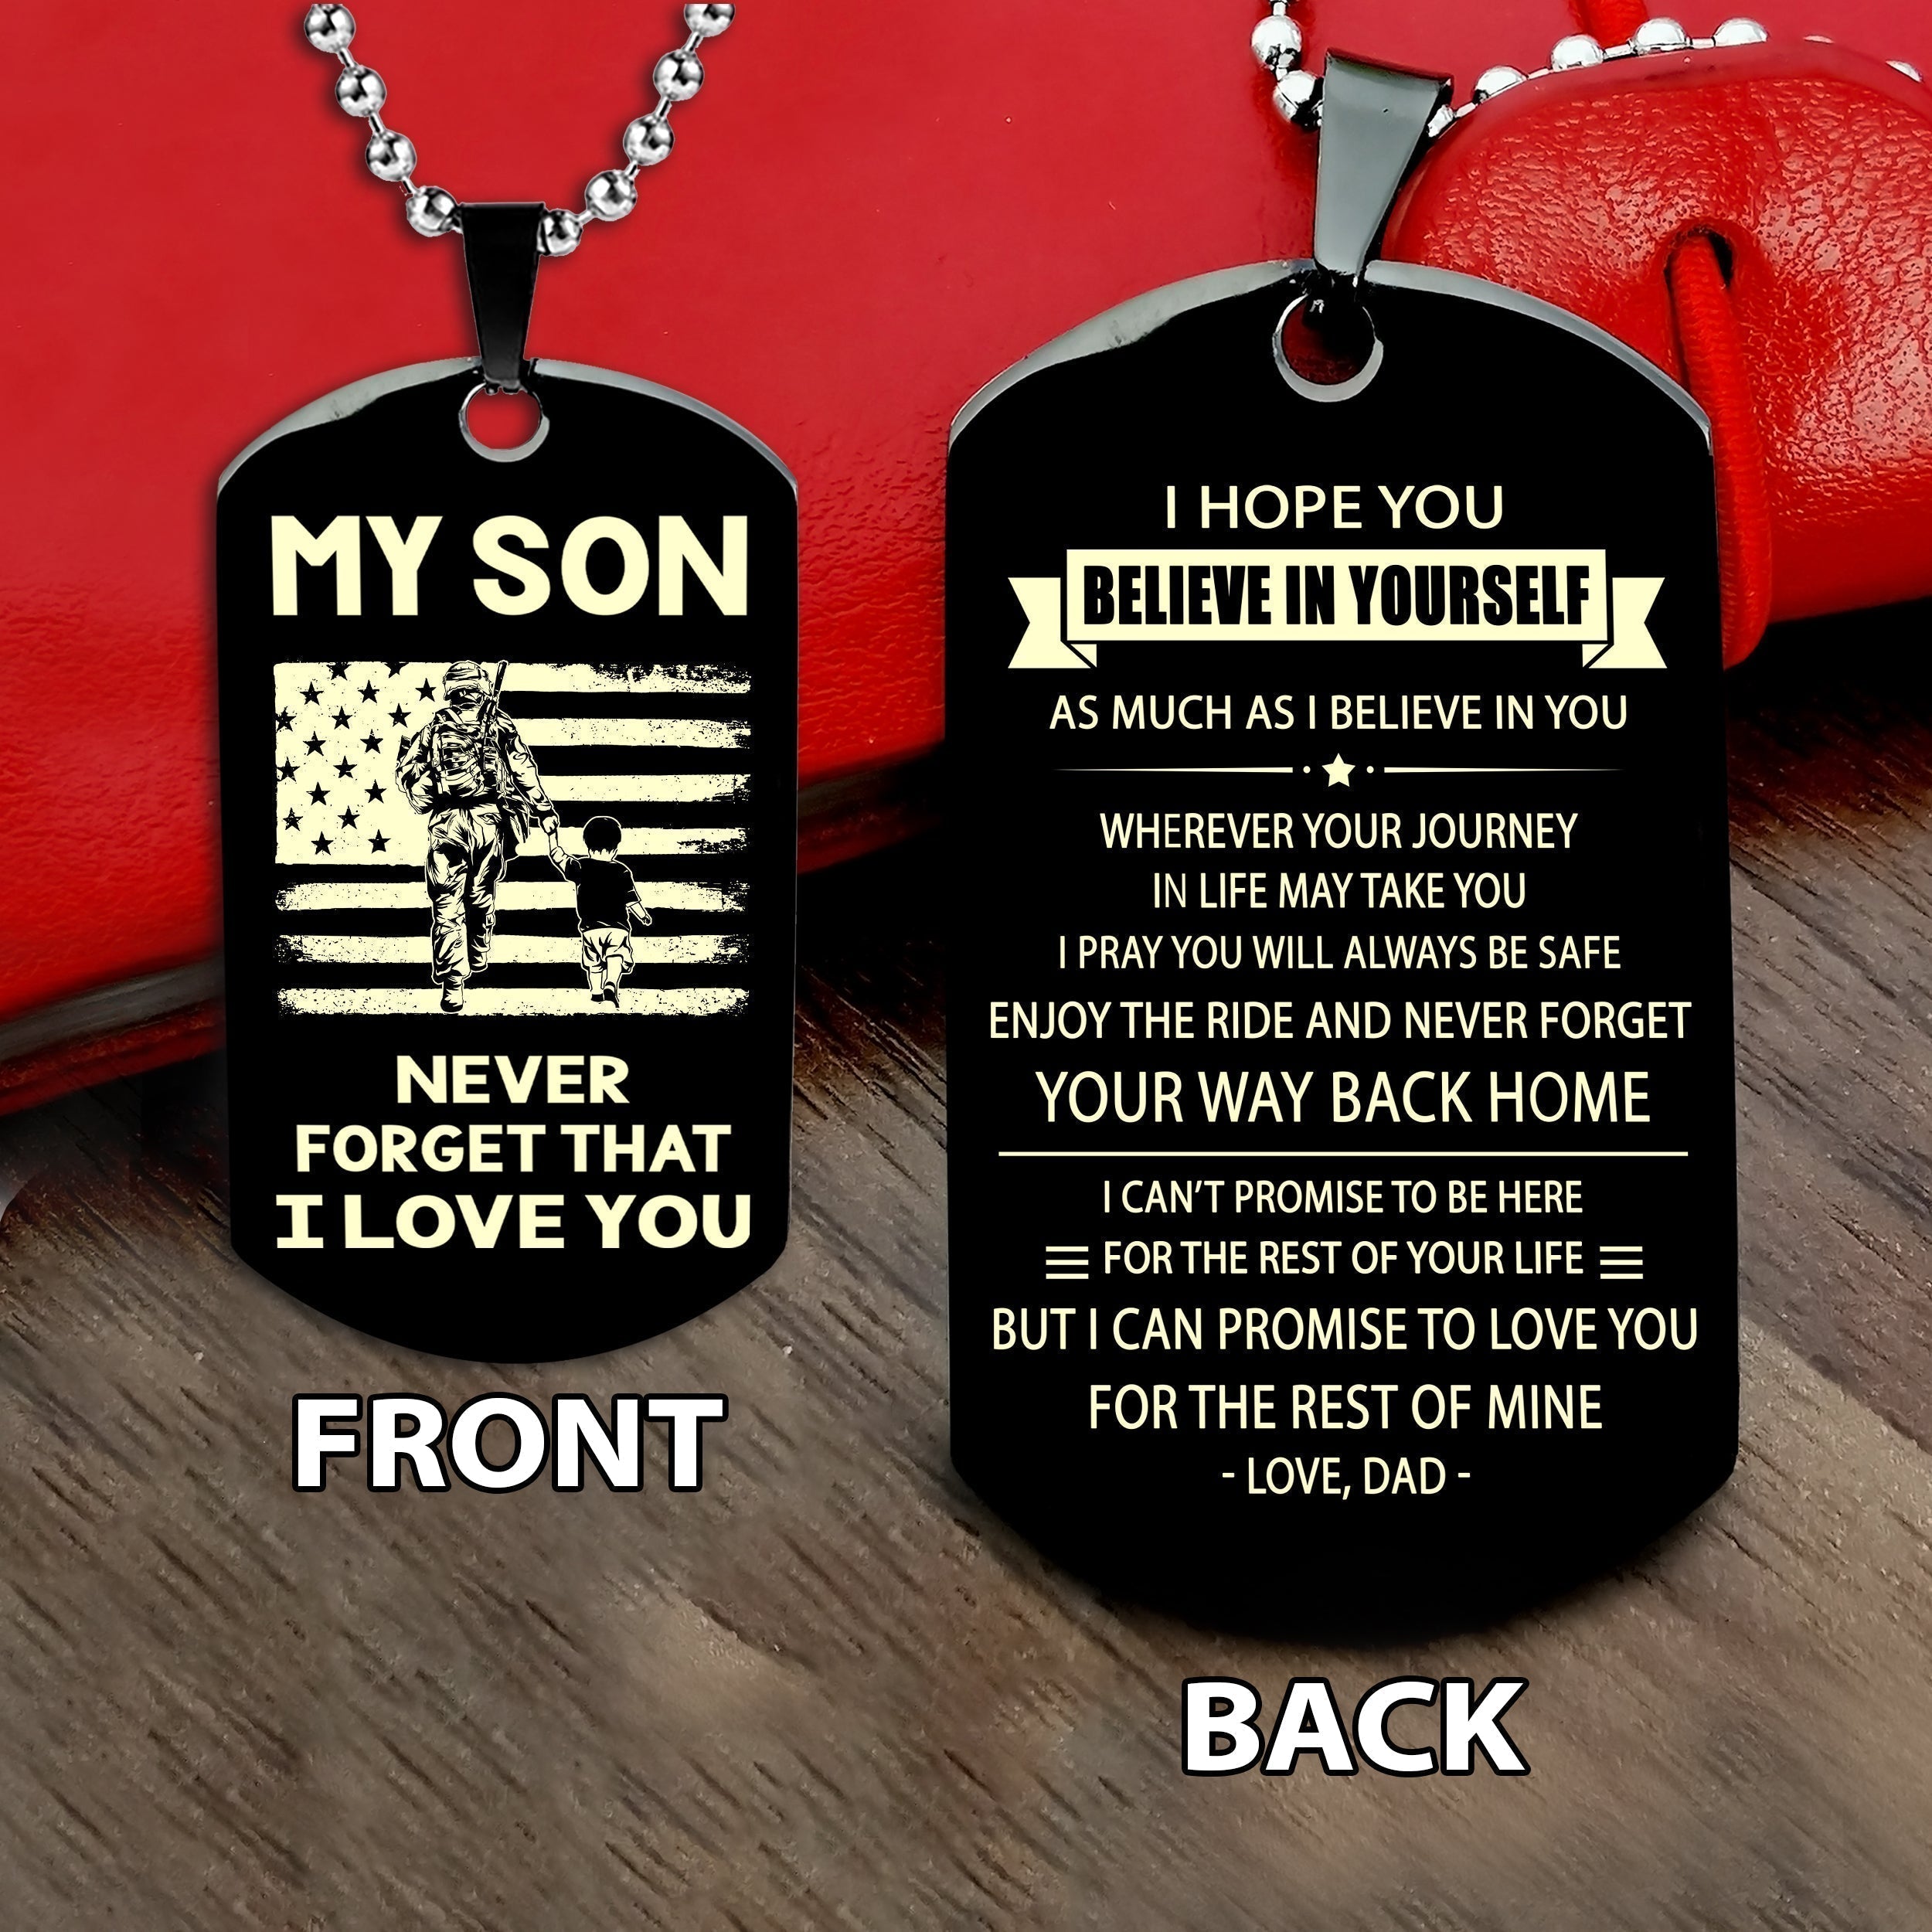 To My Son - Never Forget How Much I love You - Dog Tag - Military